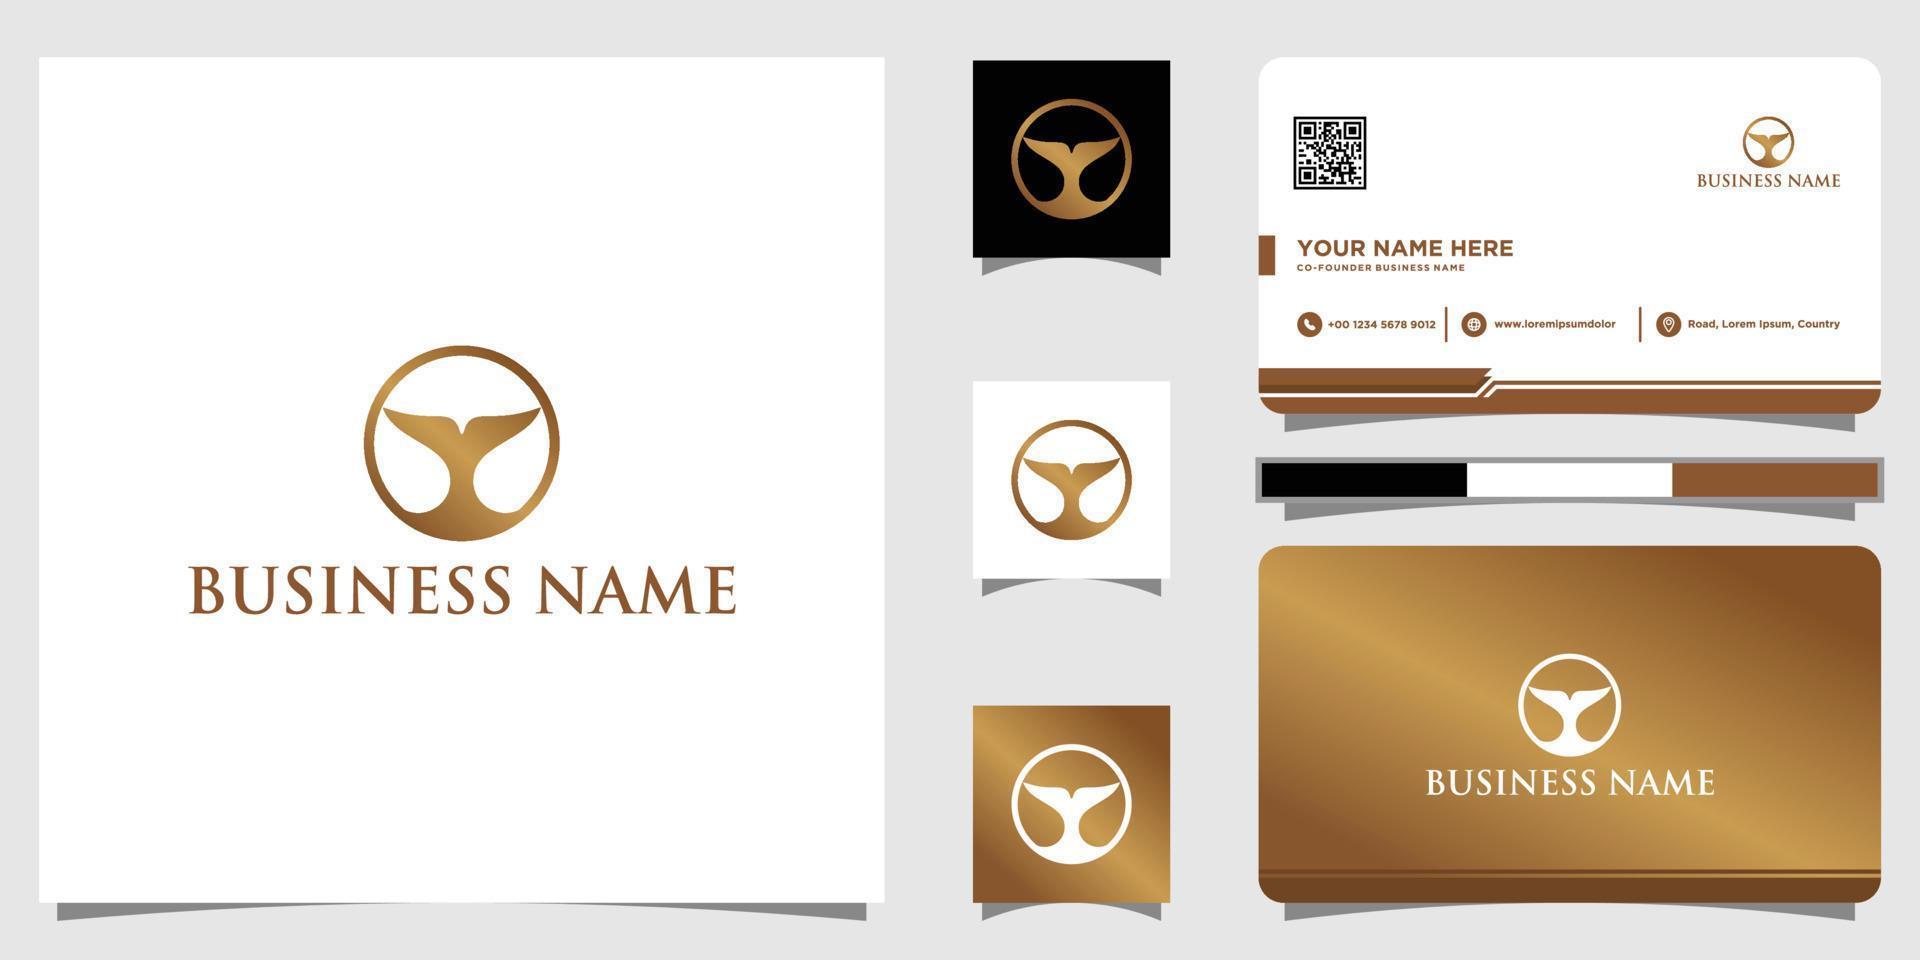 Abstract whale tail logo in gold luxury style and business card design template vector